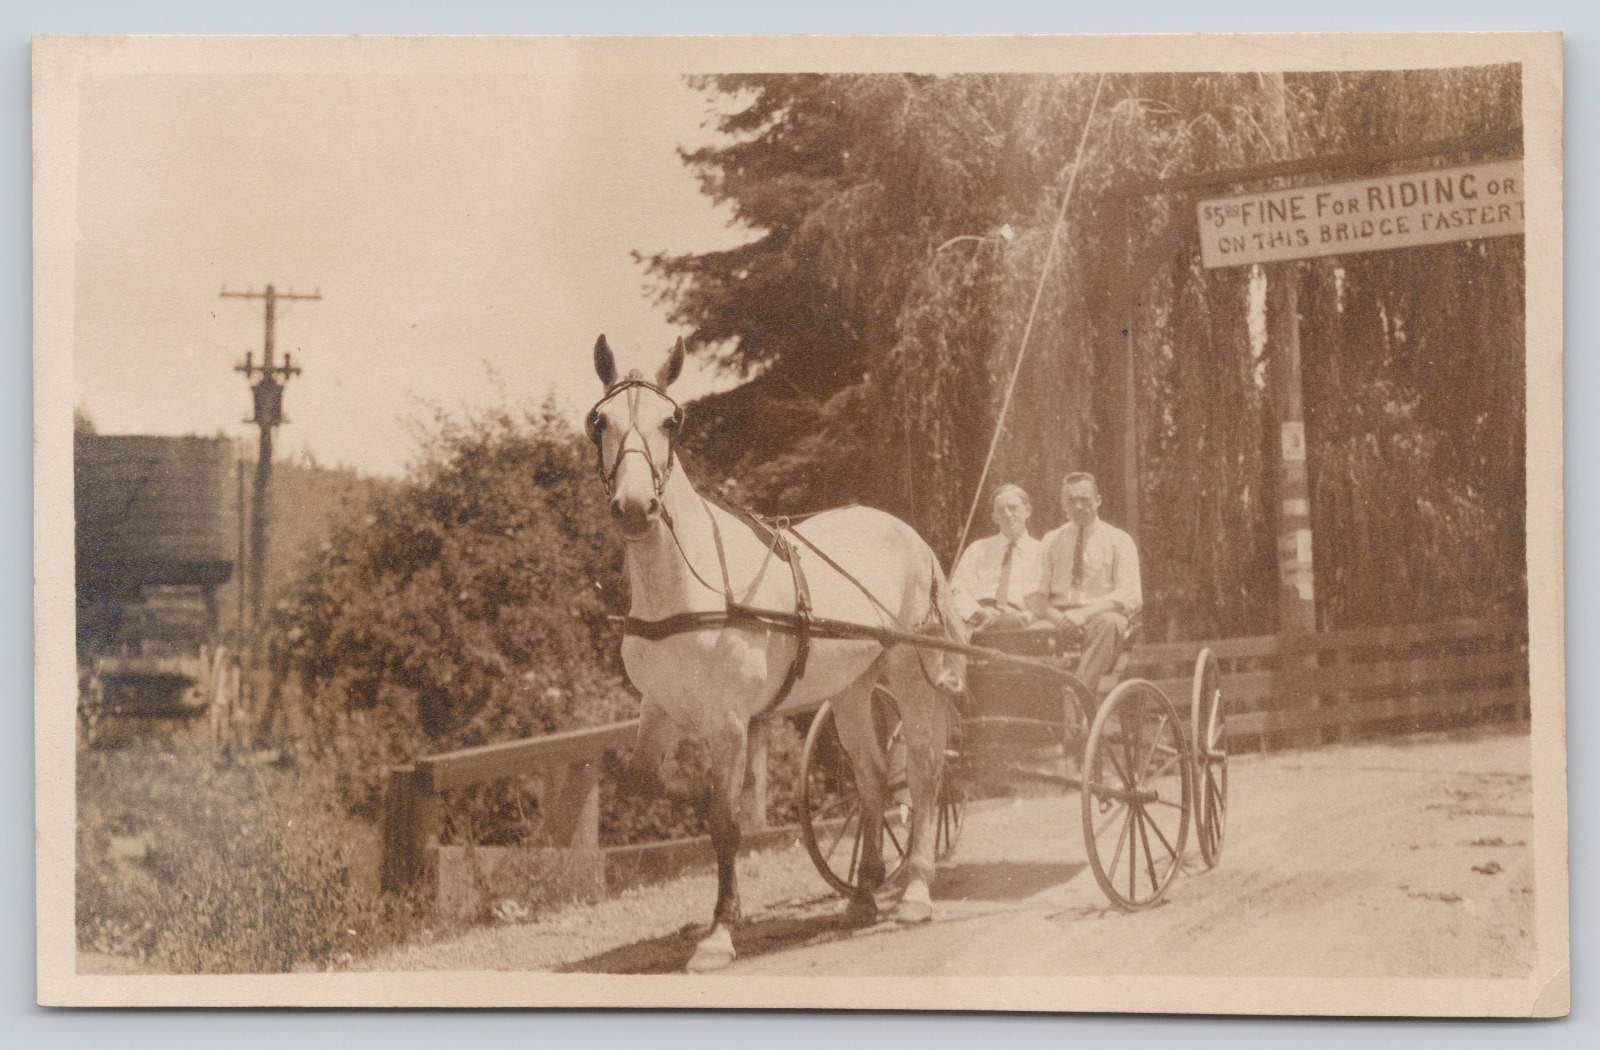 RPPC Two Men In Carriage, SIGN 5.00 Fine (for going faster) On This Bridge A1066